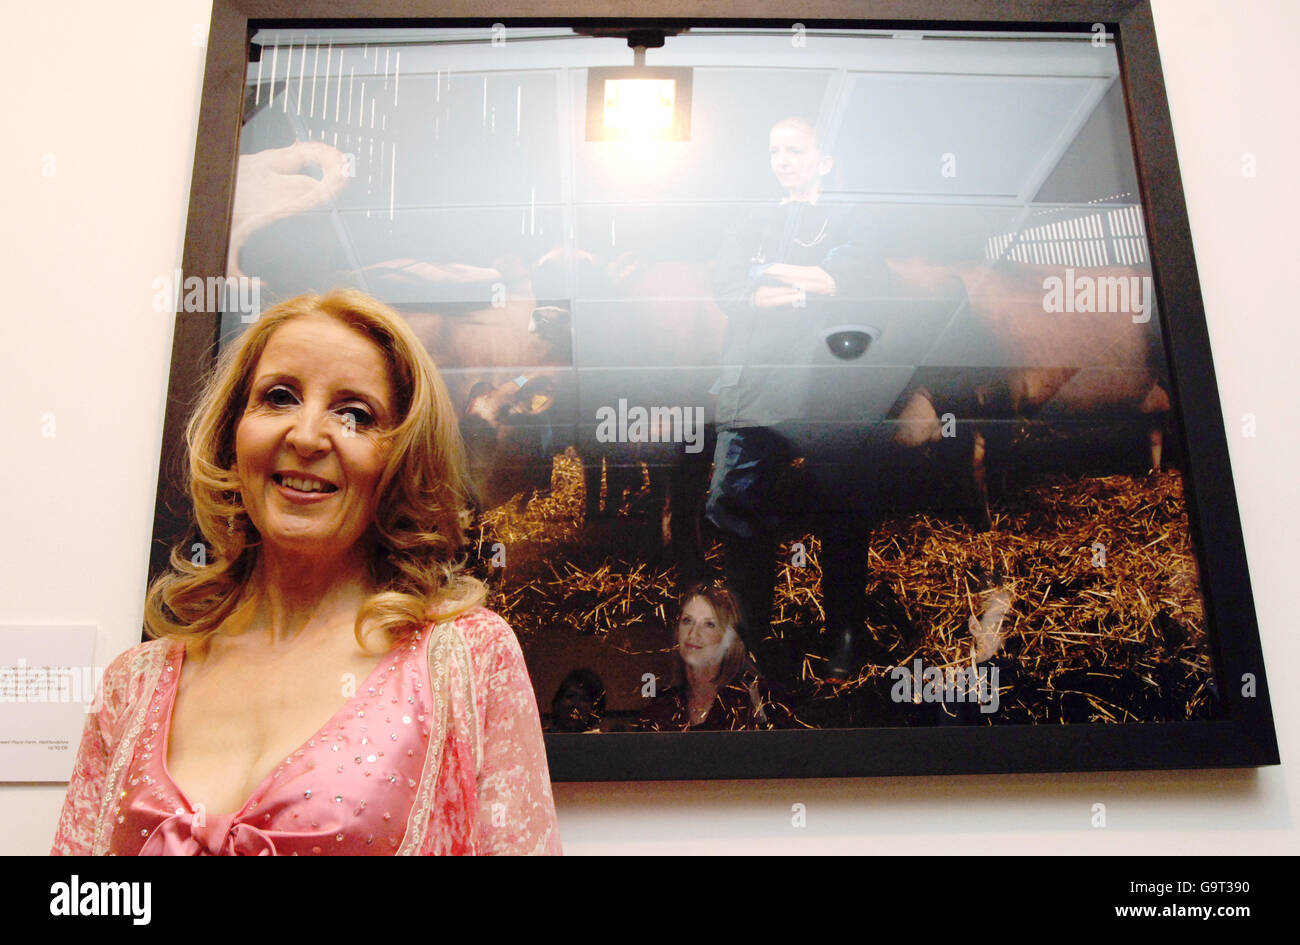 Gillian McKeith stands next to her portrait depicting her childhood dream of 'being a vet', at the 'When I Grow Up' photographic exhibition - held by the Children's Society - in central London. Stock Photo